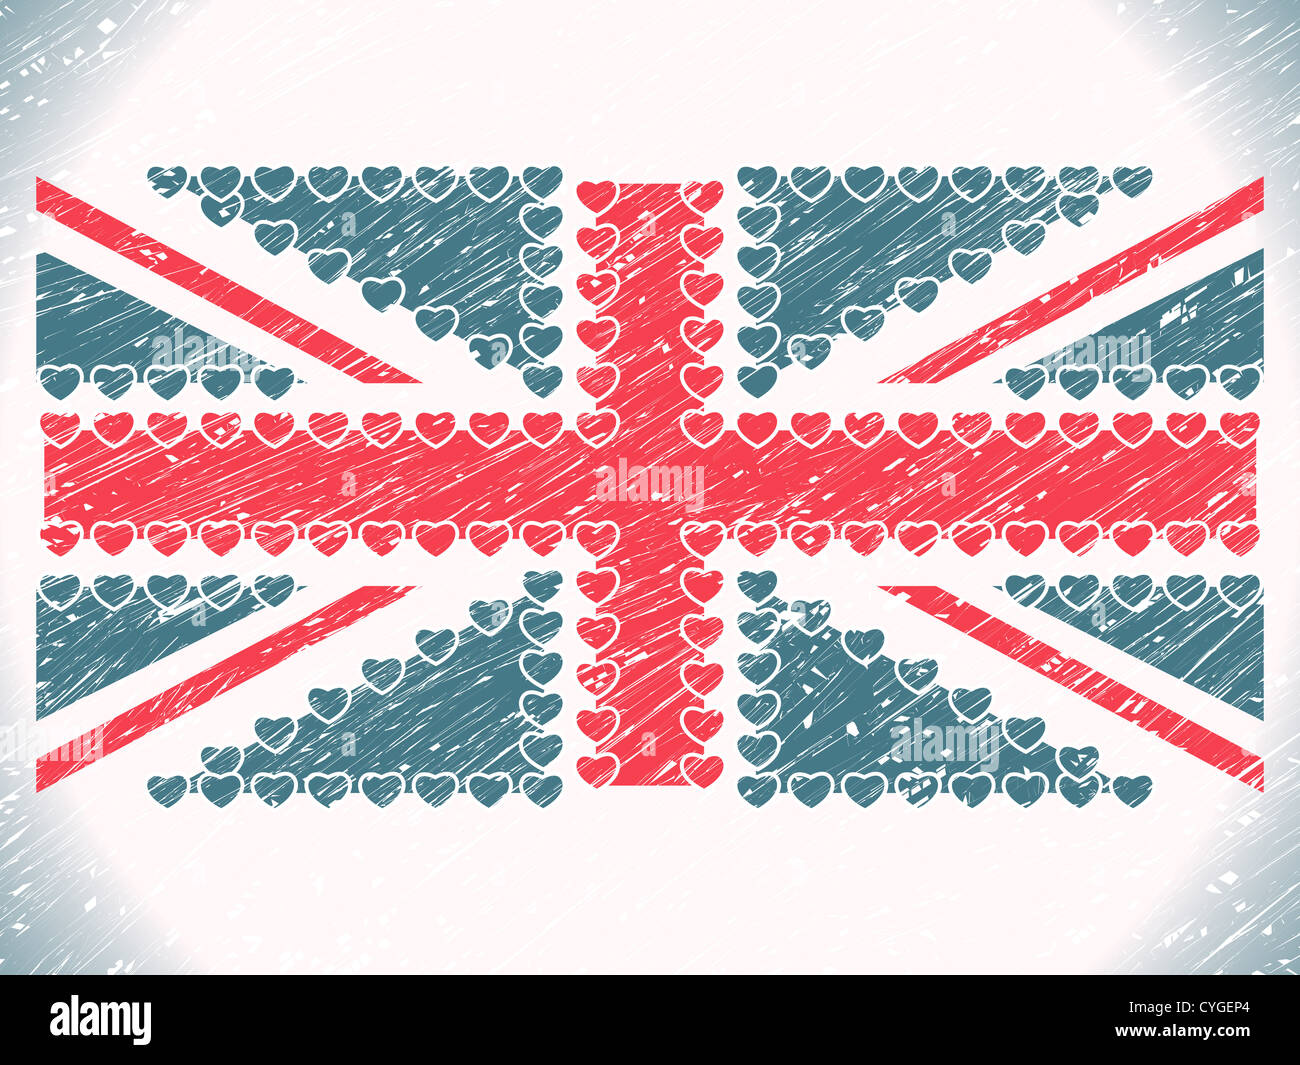 Union jack coeurs grunge flag, abstract vector art illustration Banque D'Images